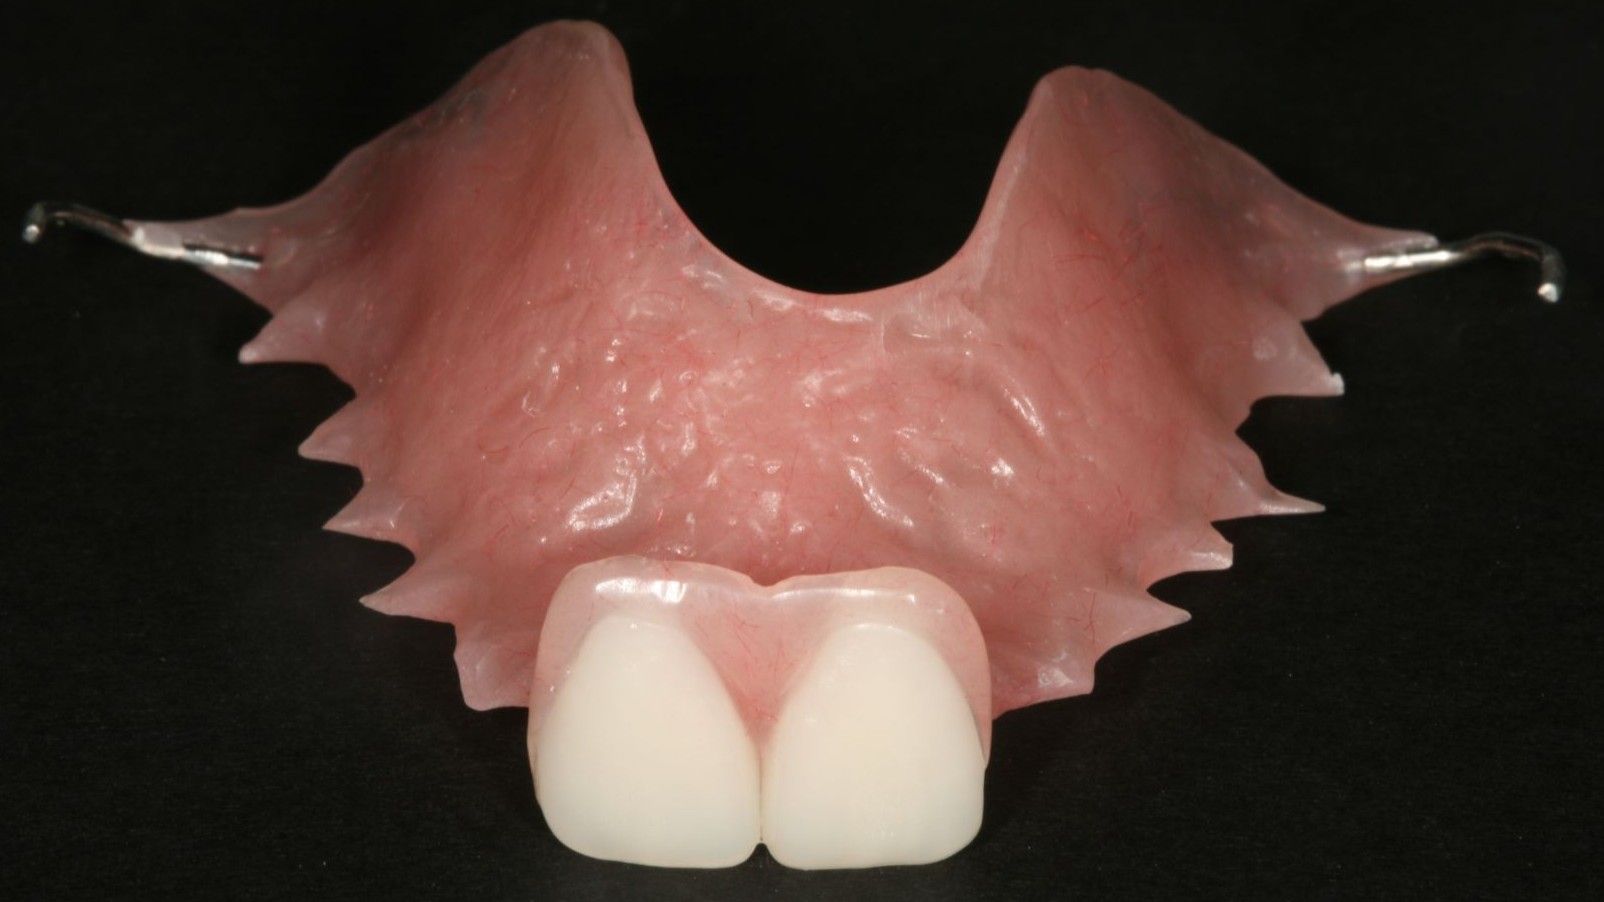 Resin Bonded Bridge: Minimally Invasive Option for Tooth Replacement - Shor  Dental